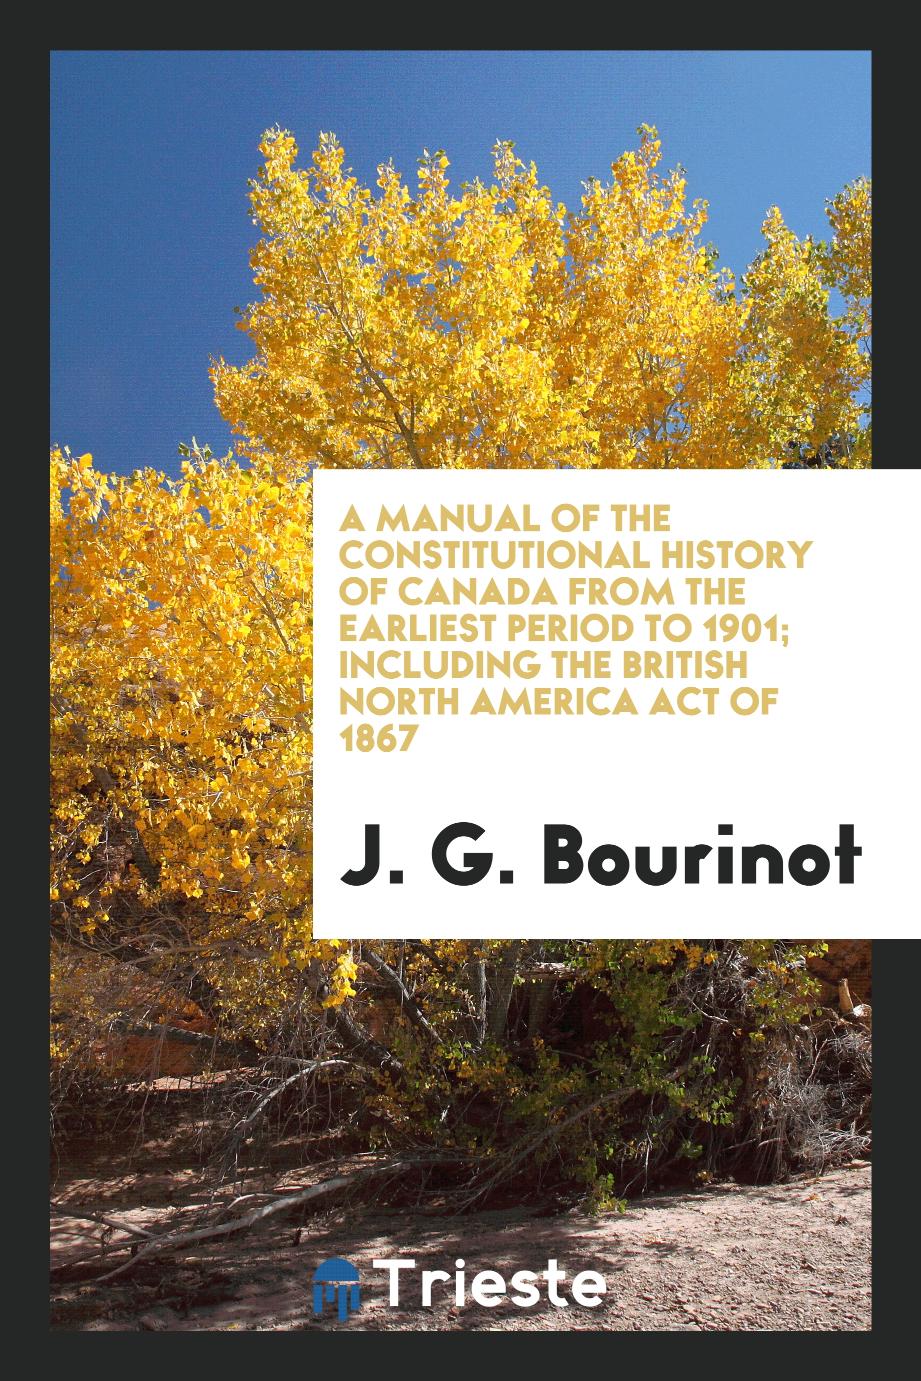 A manual of the constitutional history of Canada from the earliest period to 1901; including the British North America act of 1867